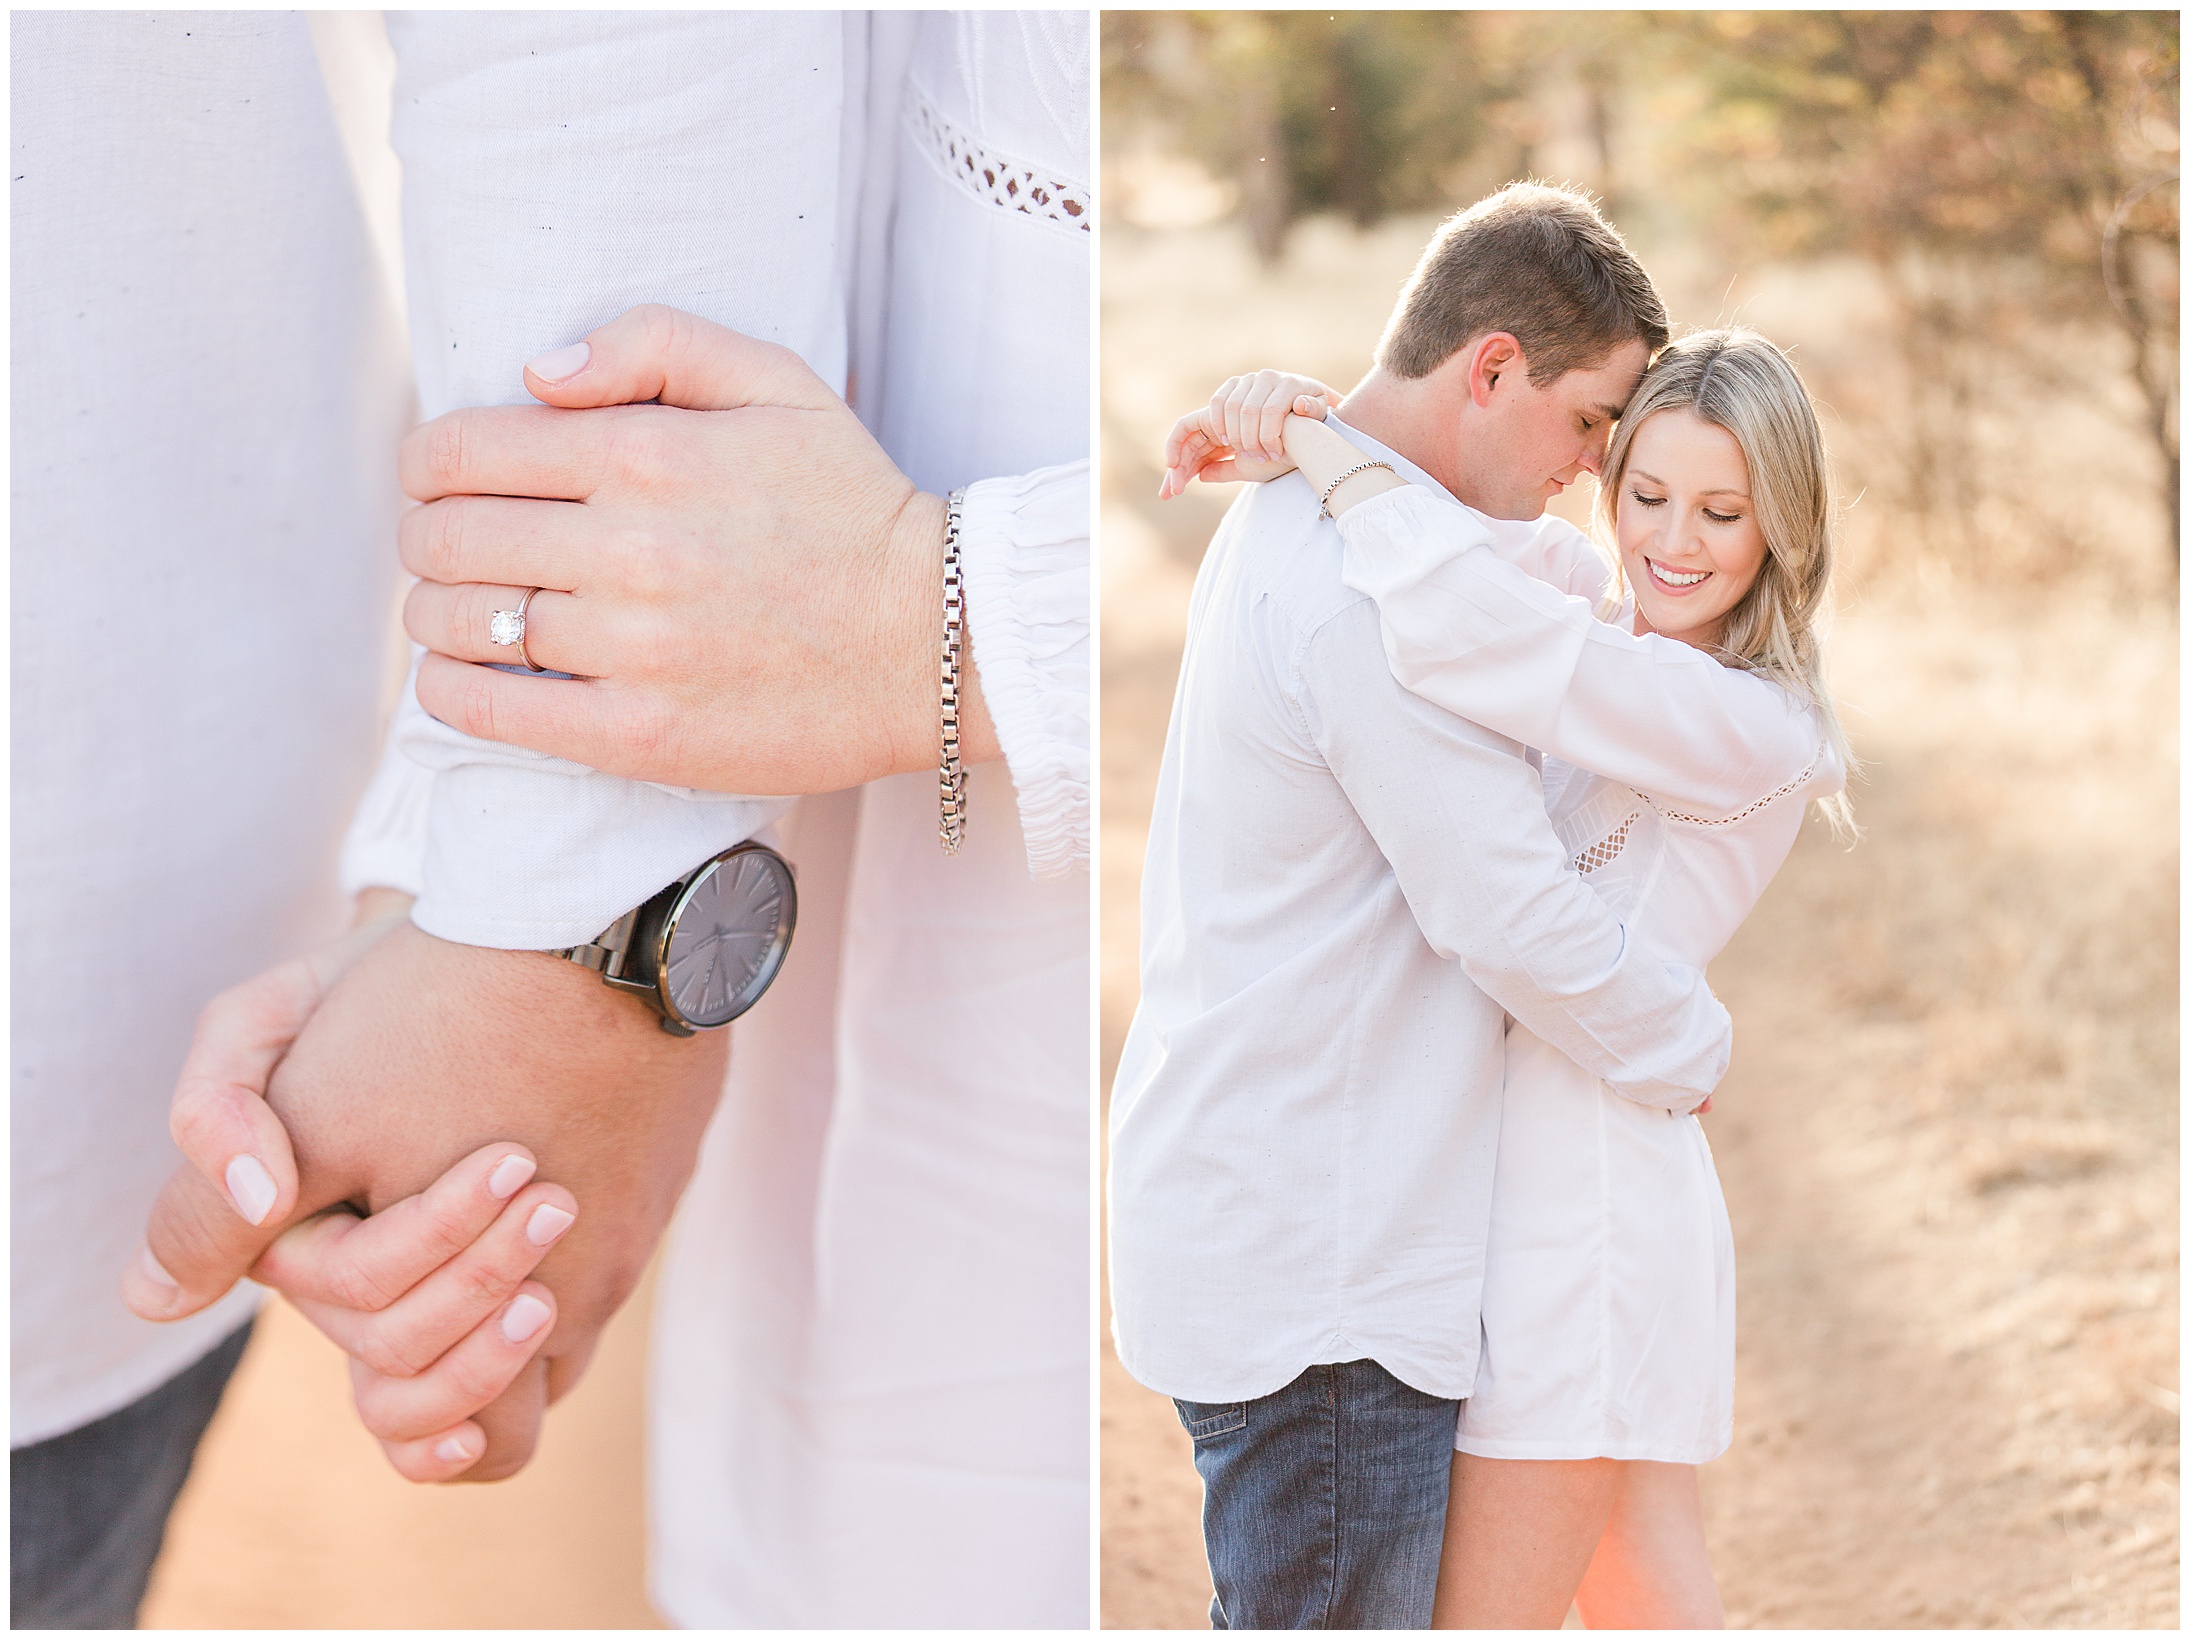 Upper Bidwell Park Chico California Fall Engagement Session Champagne,